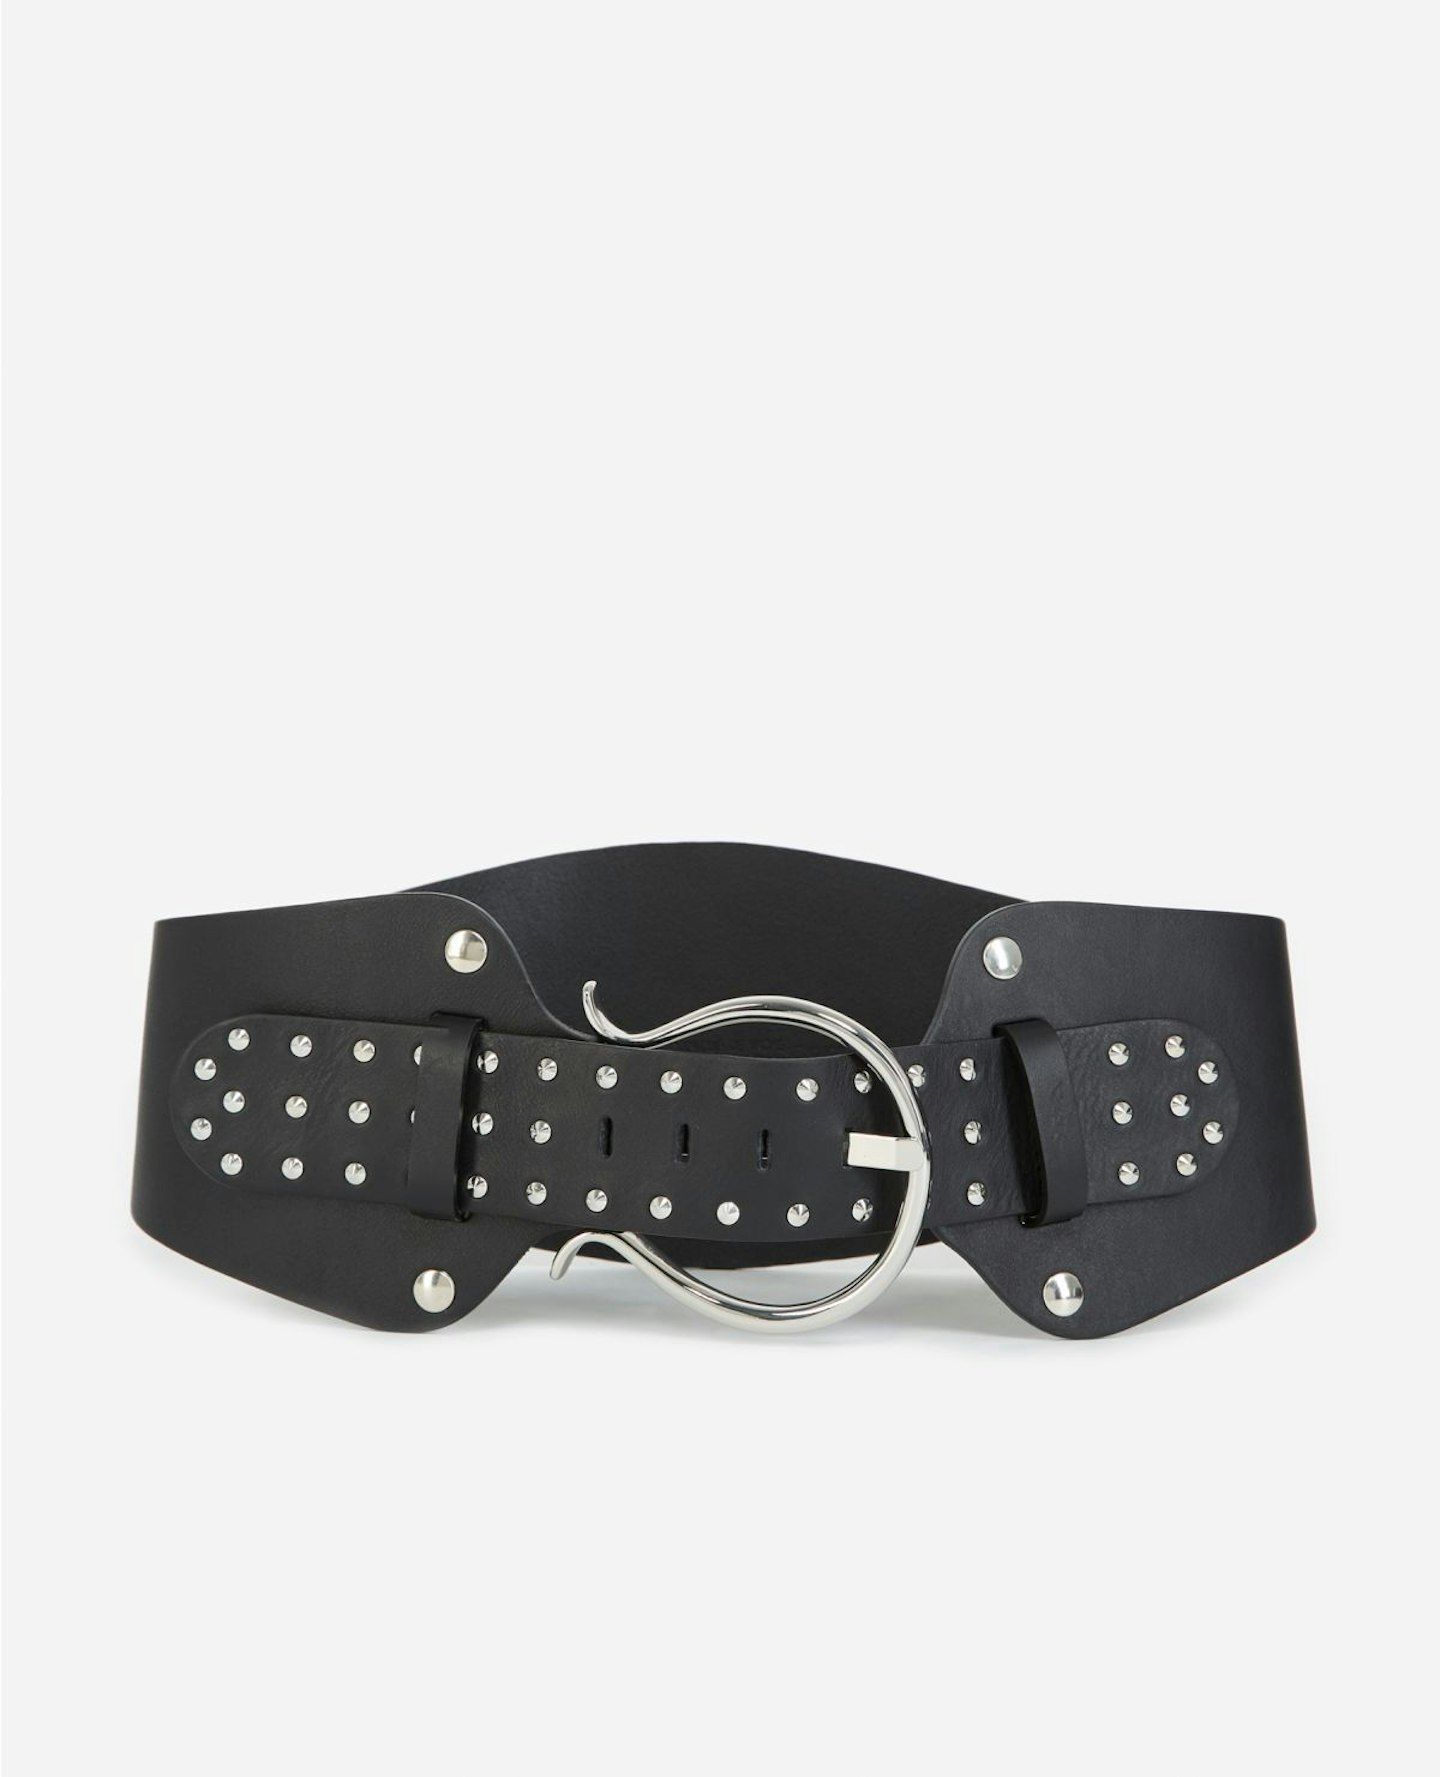 The Kooples, Large Black Leather Belt With Studs, £171.50